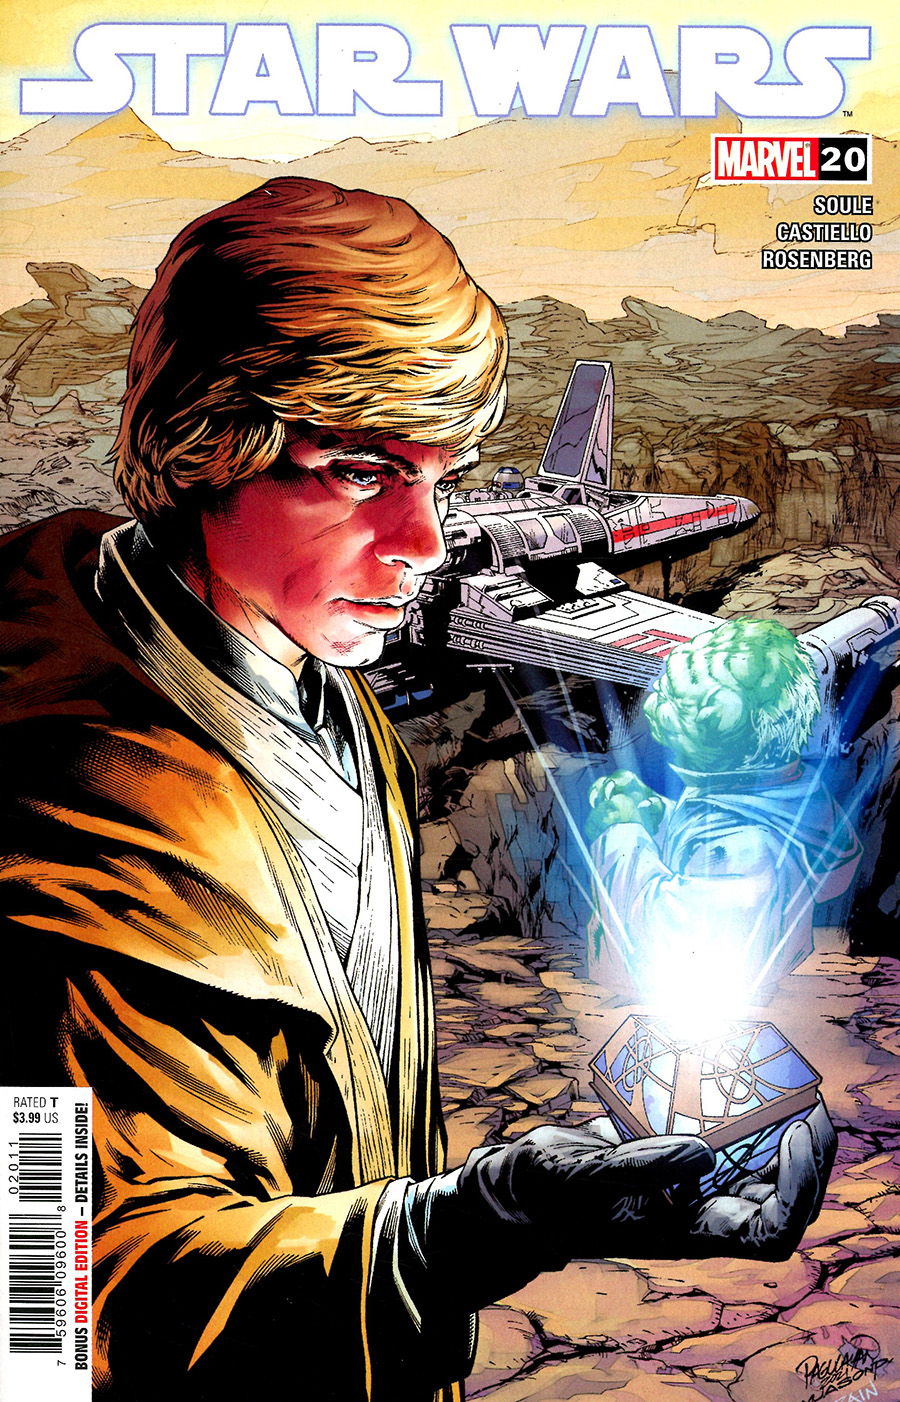 Star Wars Vol 5 #20 Cover A Regular Carlo Pagulayan Cover